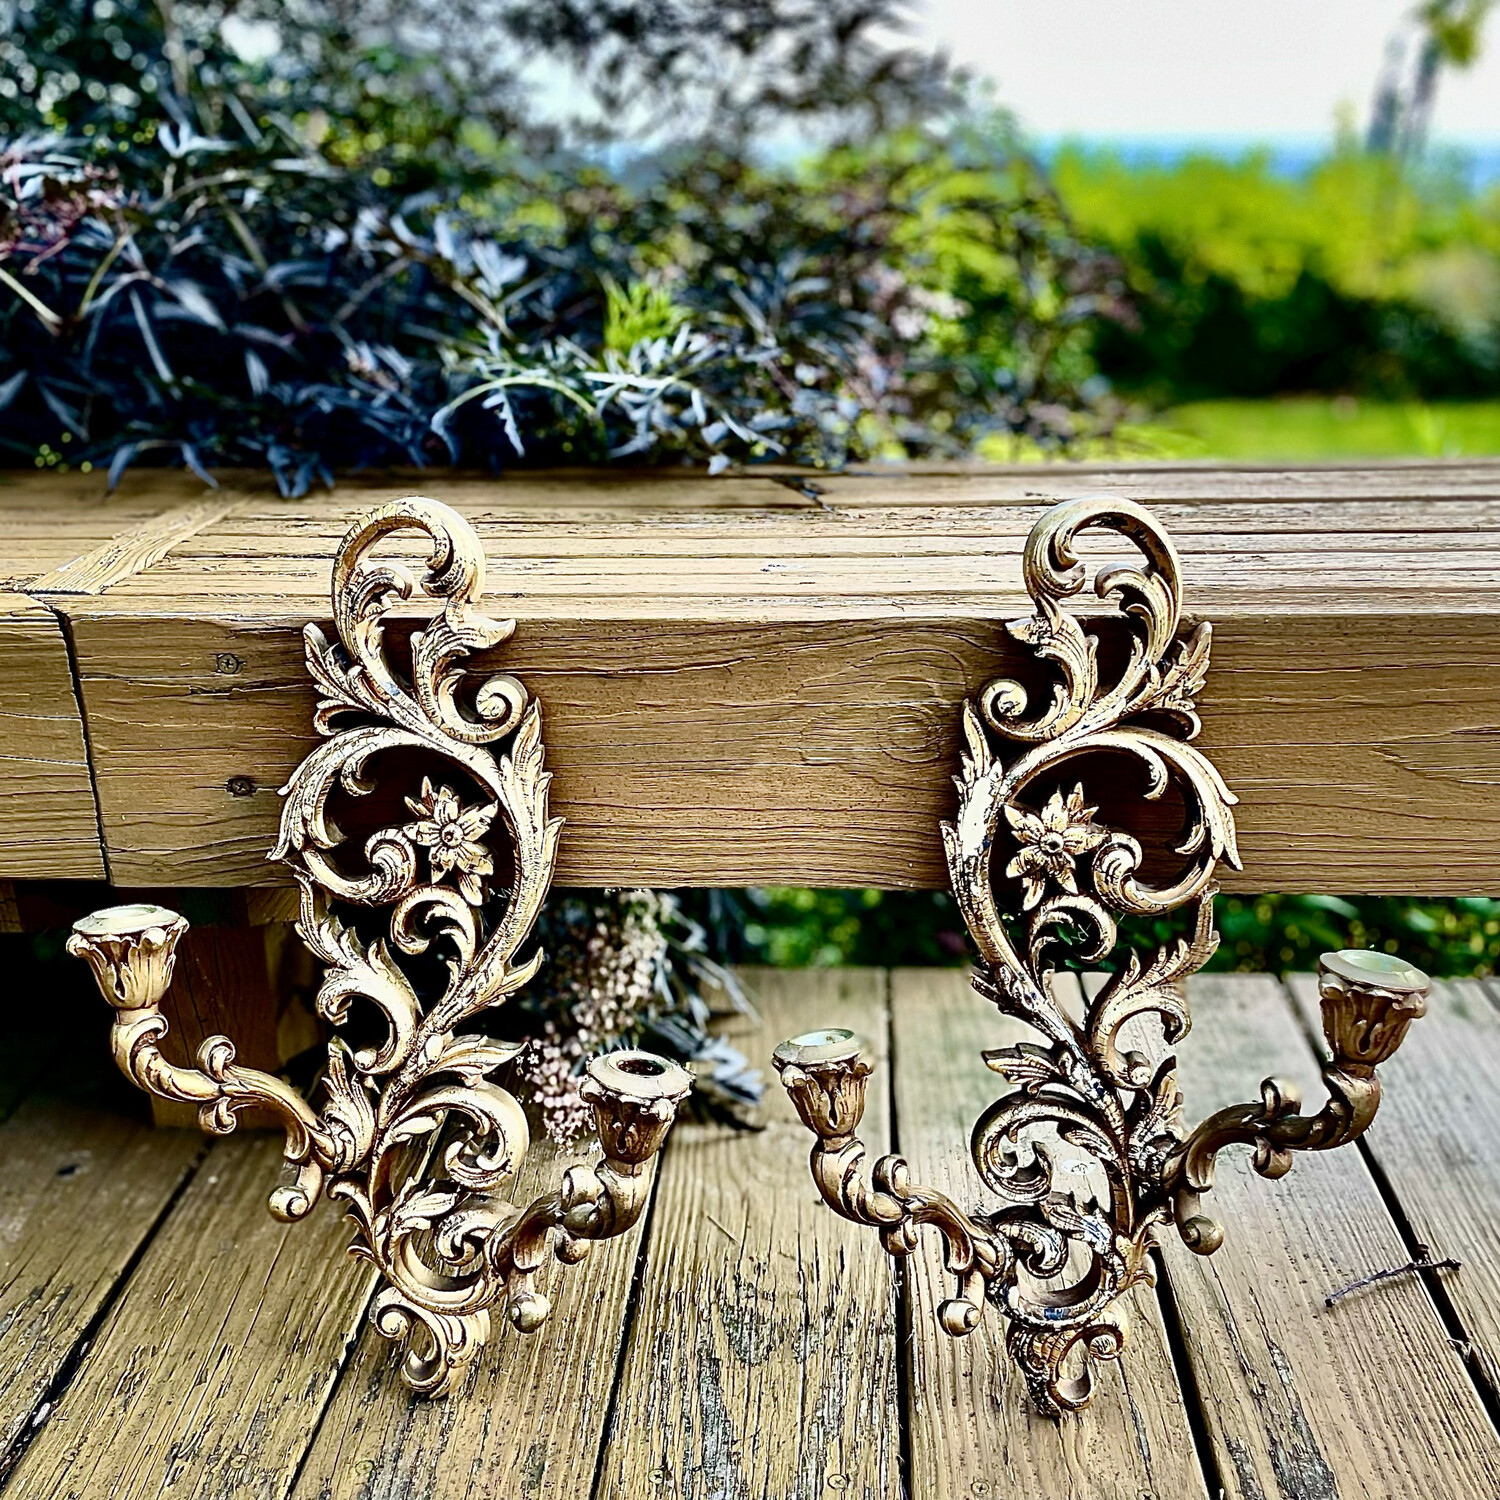 Vintage Wall Sconces Candle Holders - set of 2 